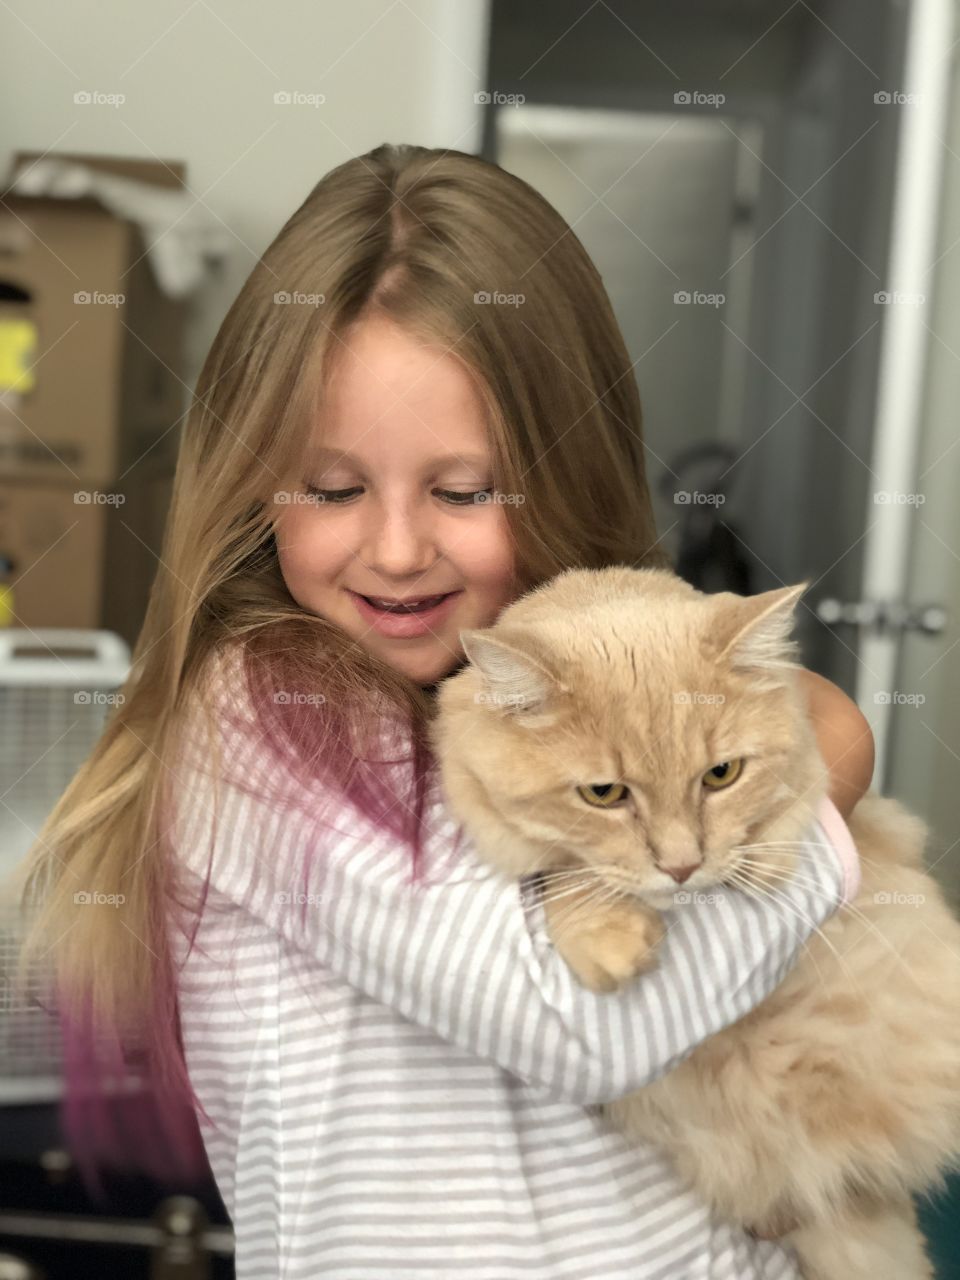 A kid and her cat